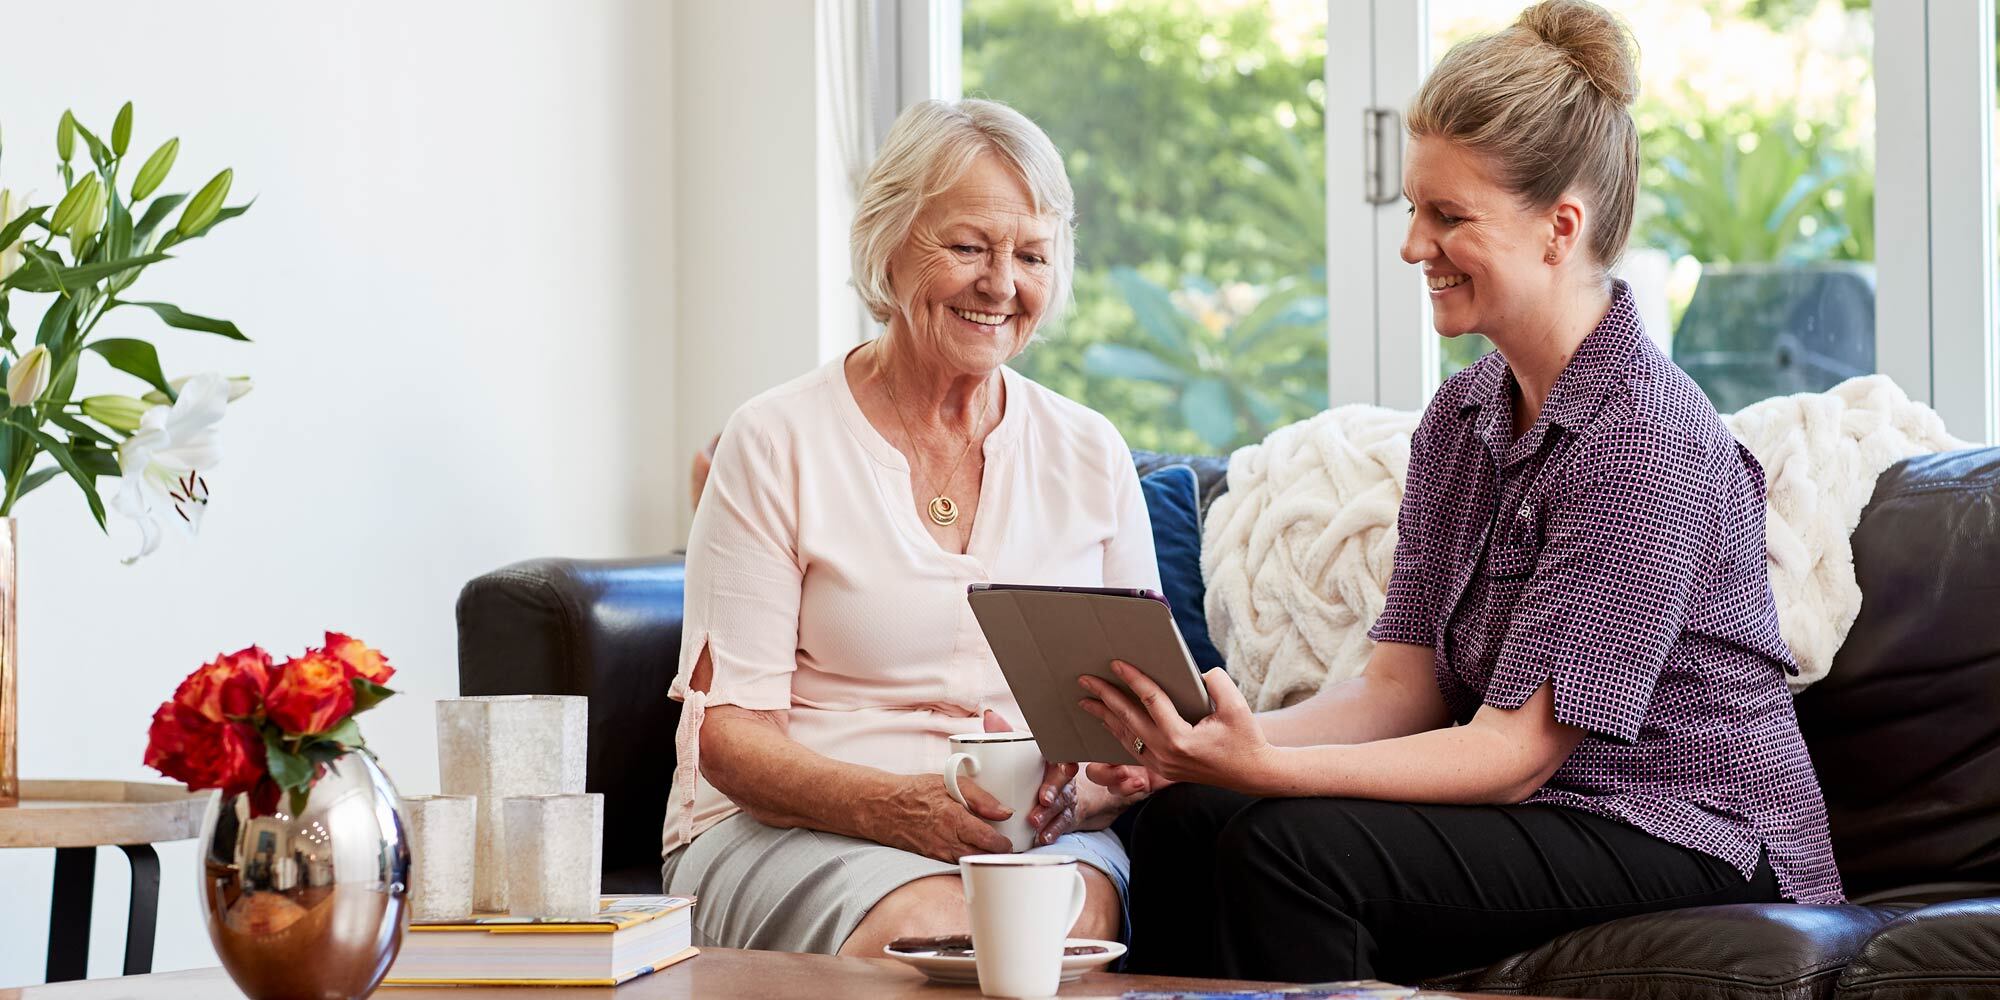 A KinCare home care shows an older woman how to use a tablet.